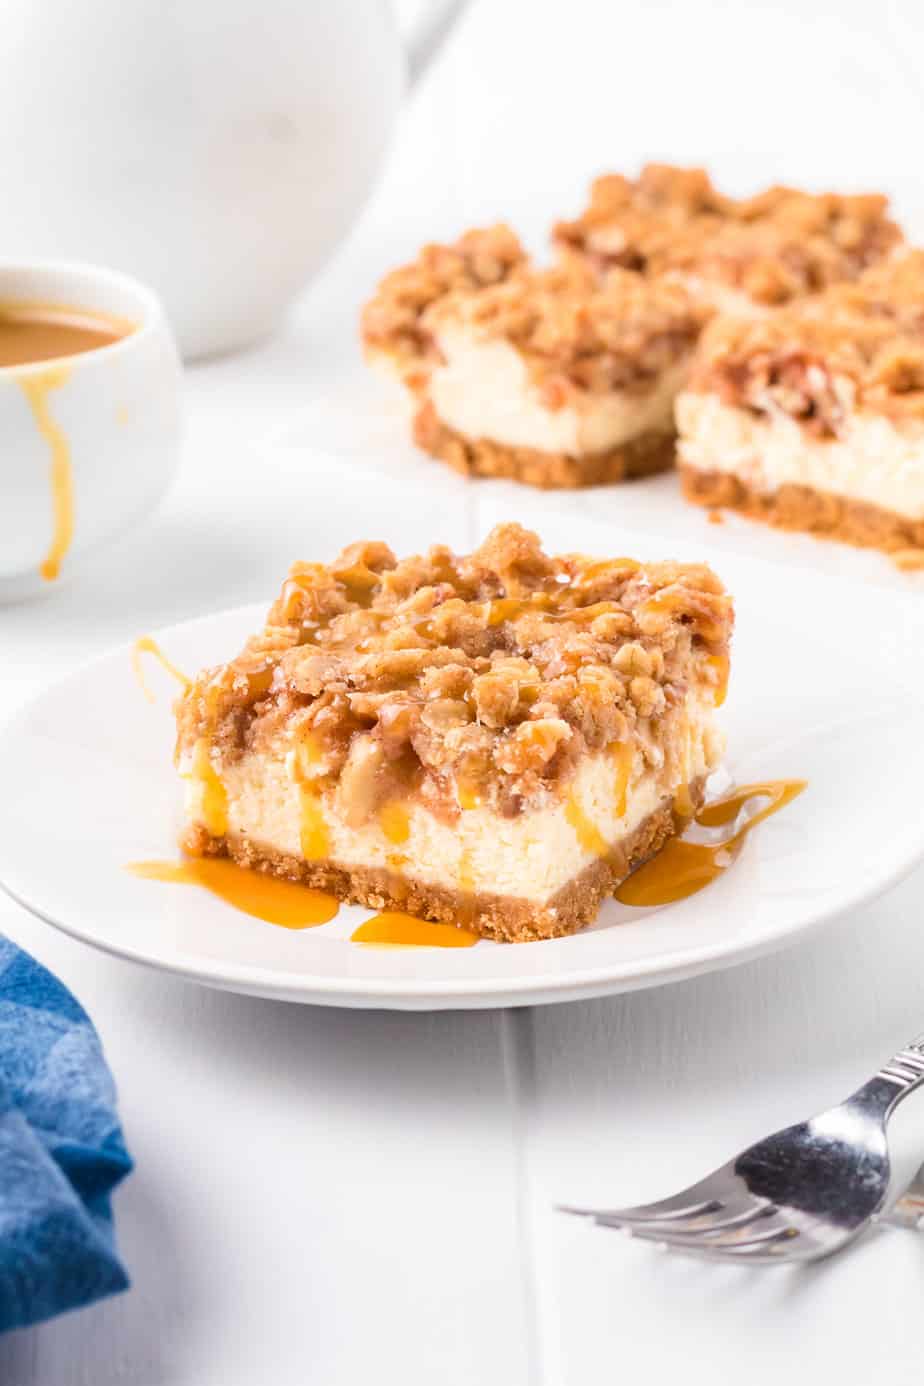 Plated apple cheesecake bar with a caramel drizzle from the side with more cheesecake bars and caramel in the background.